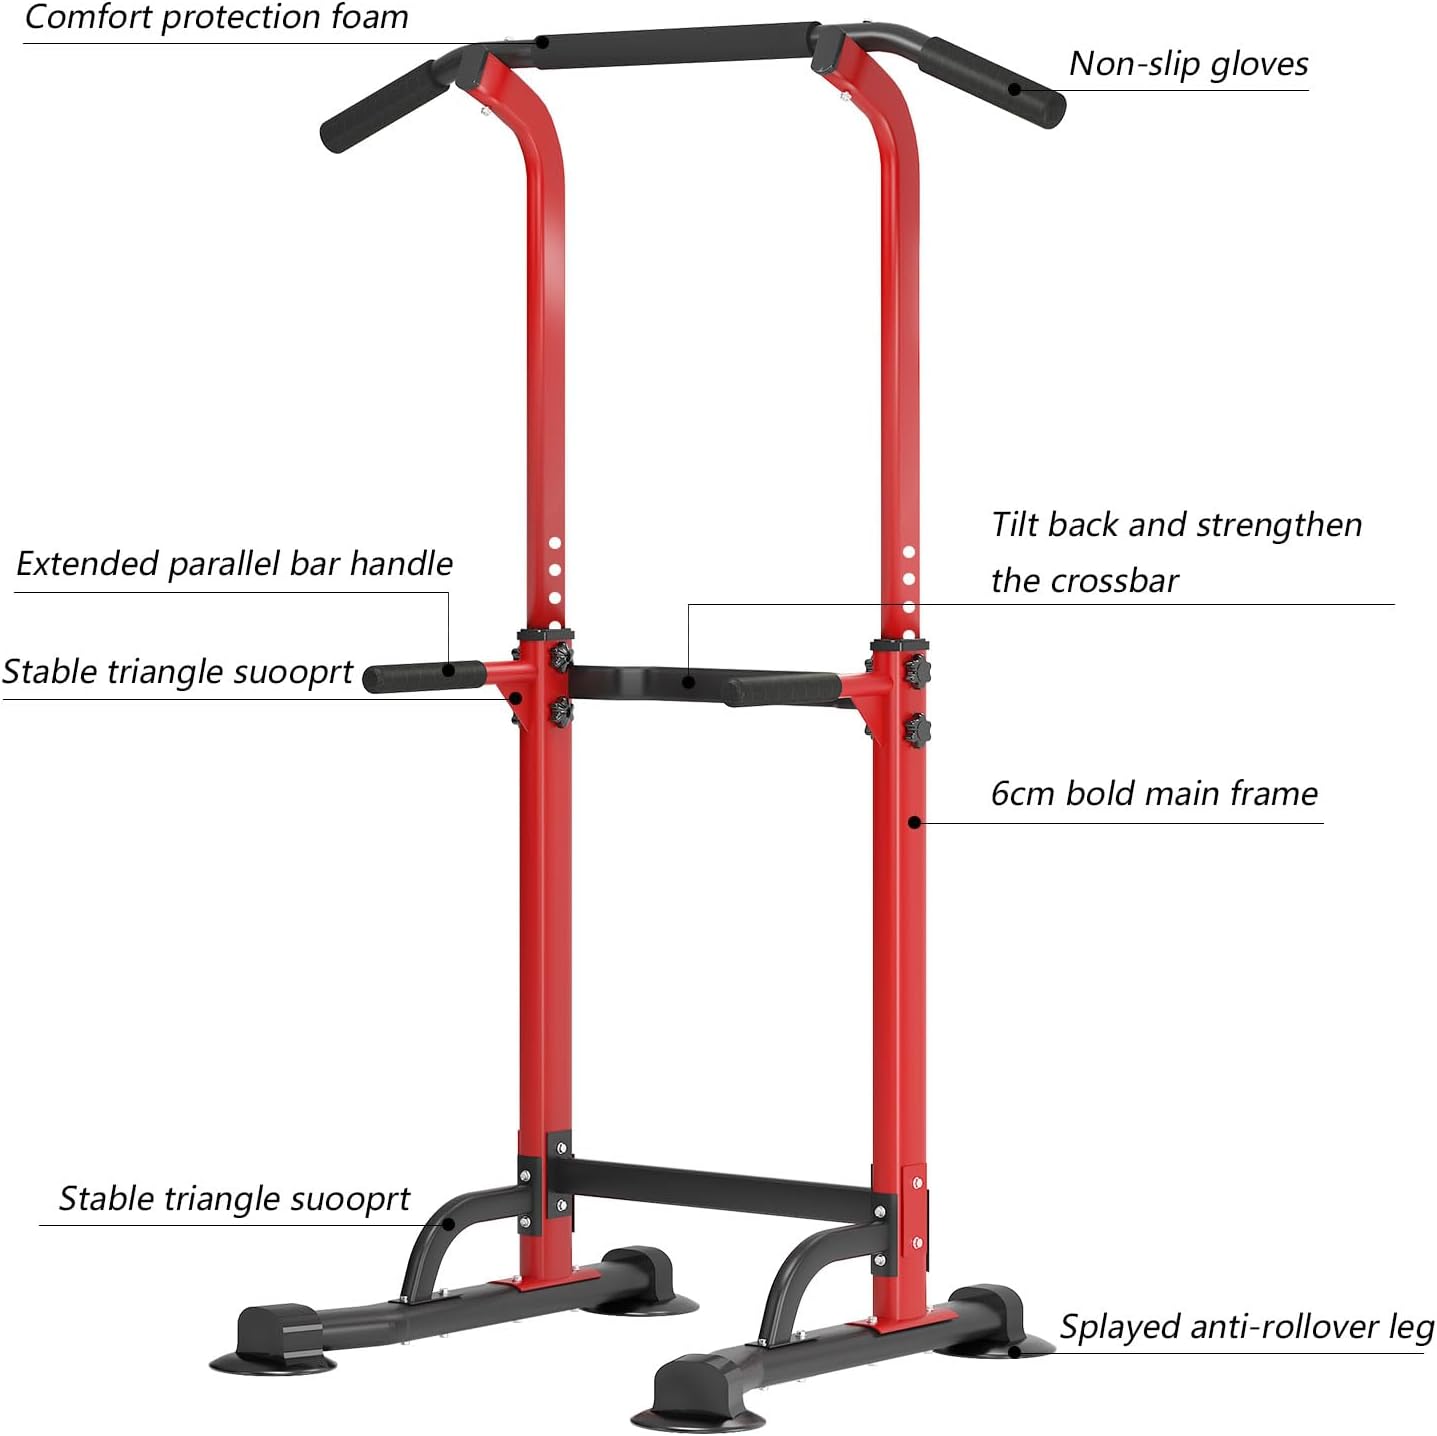 Station Pull Up Bar for Home Gym Adjustable Height Strength Training Workout Equipment,Pull Up Bar Station